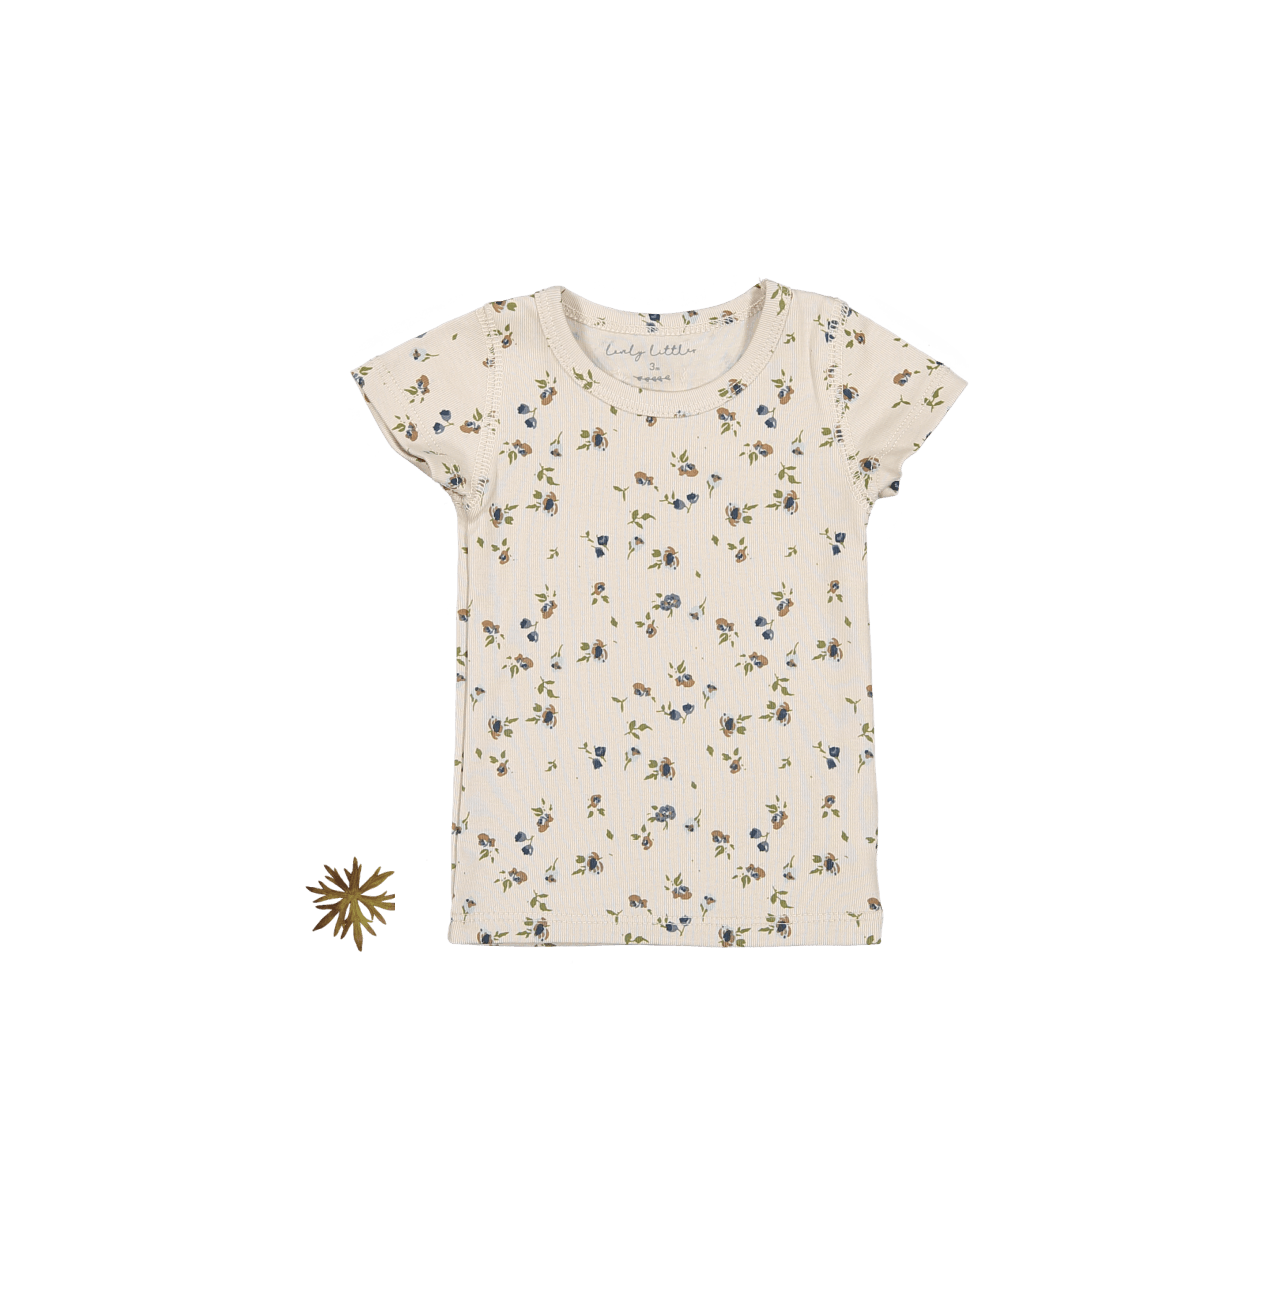 The Printed Short Sleeve Tee - Floral Sand